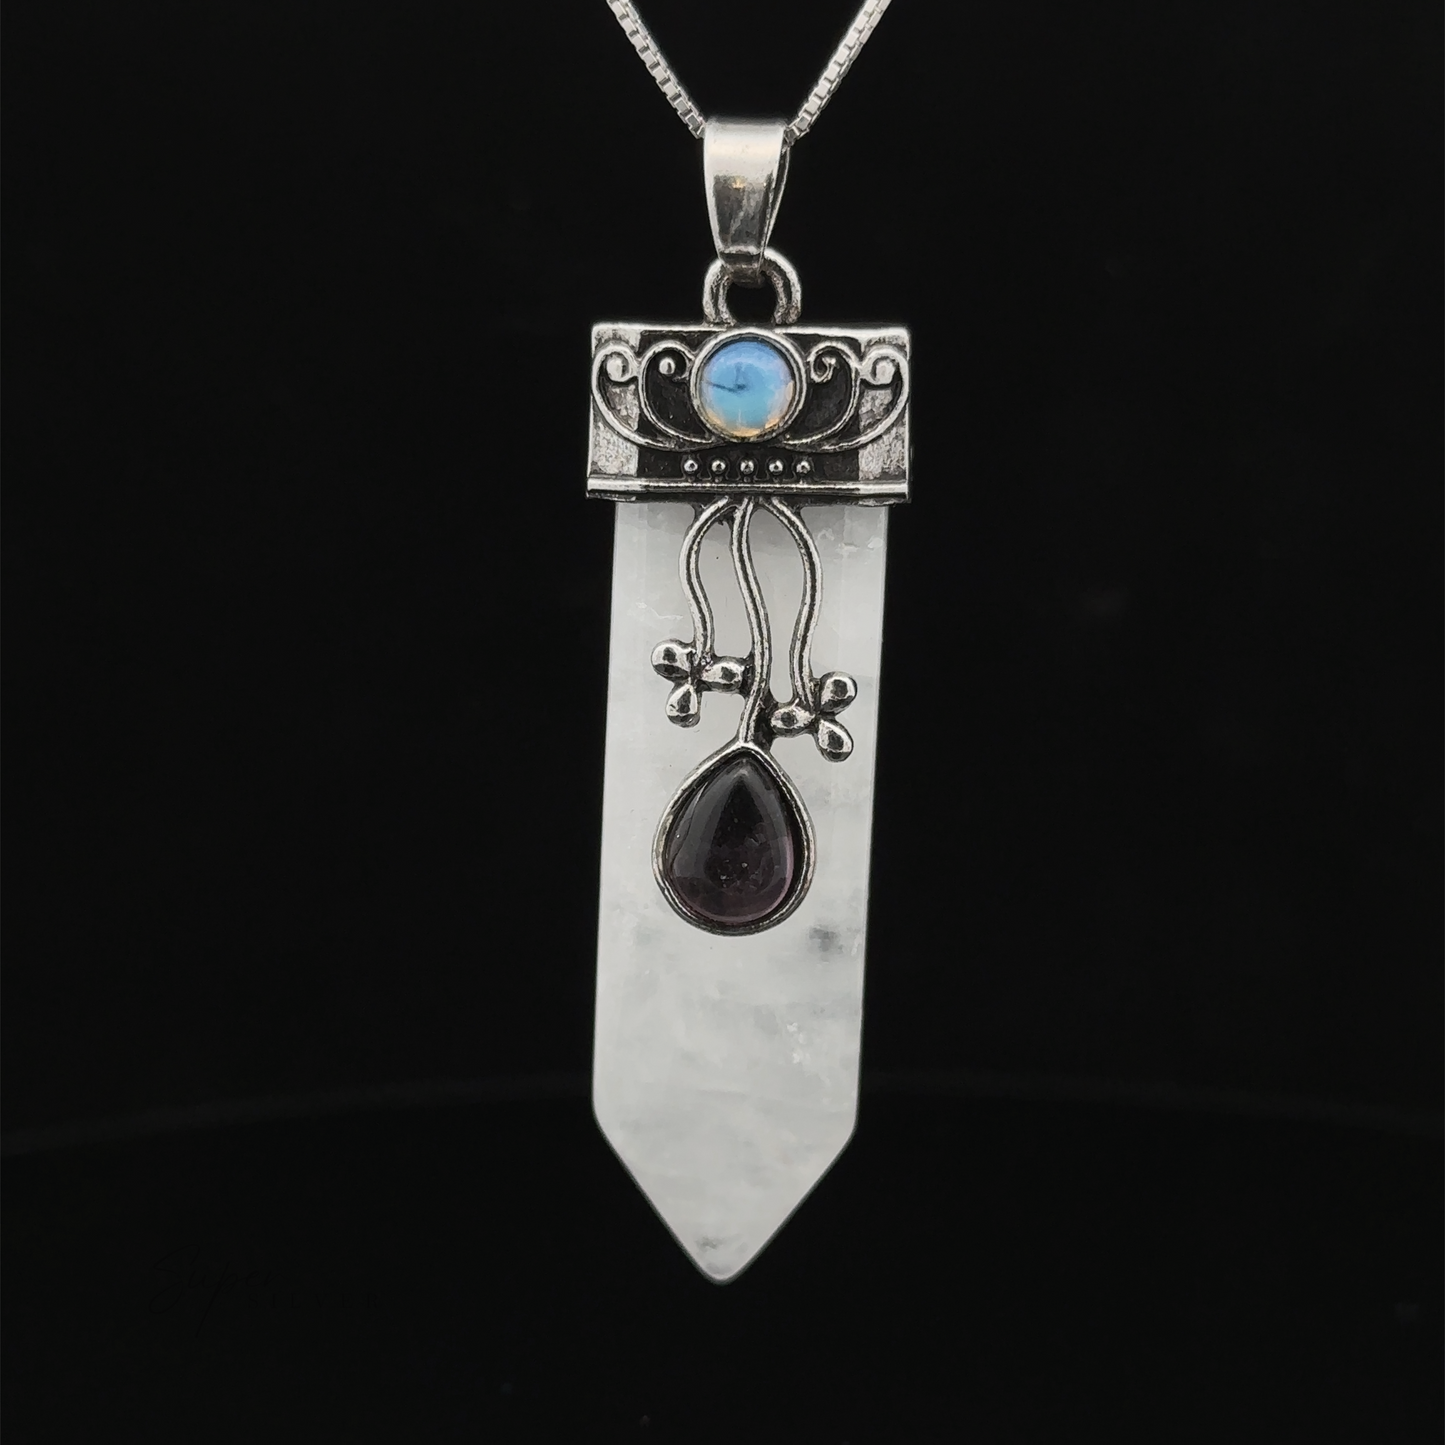 
                  
                    An Obelisk Crystal Stone Pendant with intricate silver designs features a blue gemstone, a pointed clear crystal, and a teardrop-shaped dark gem. Attached to a chain, the pendant stands out beautifully against a black background.
                  
                